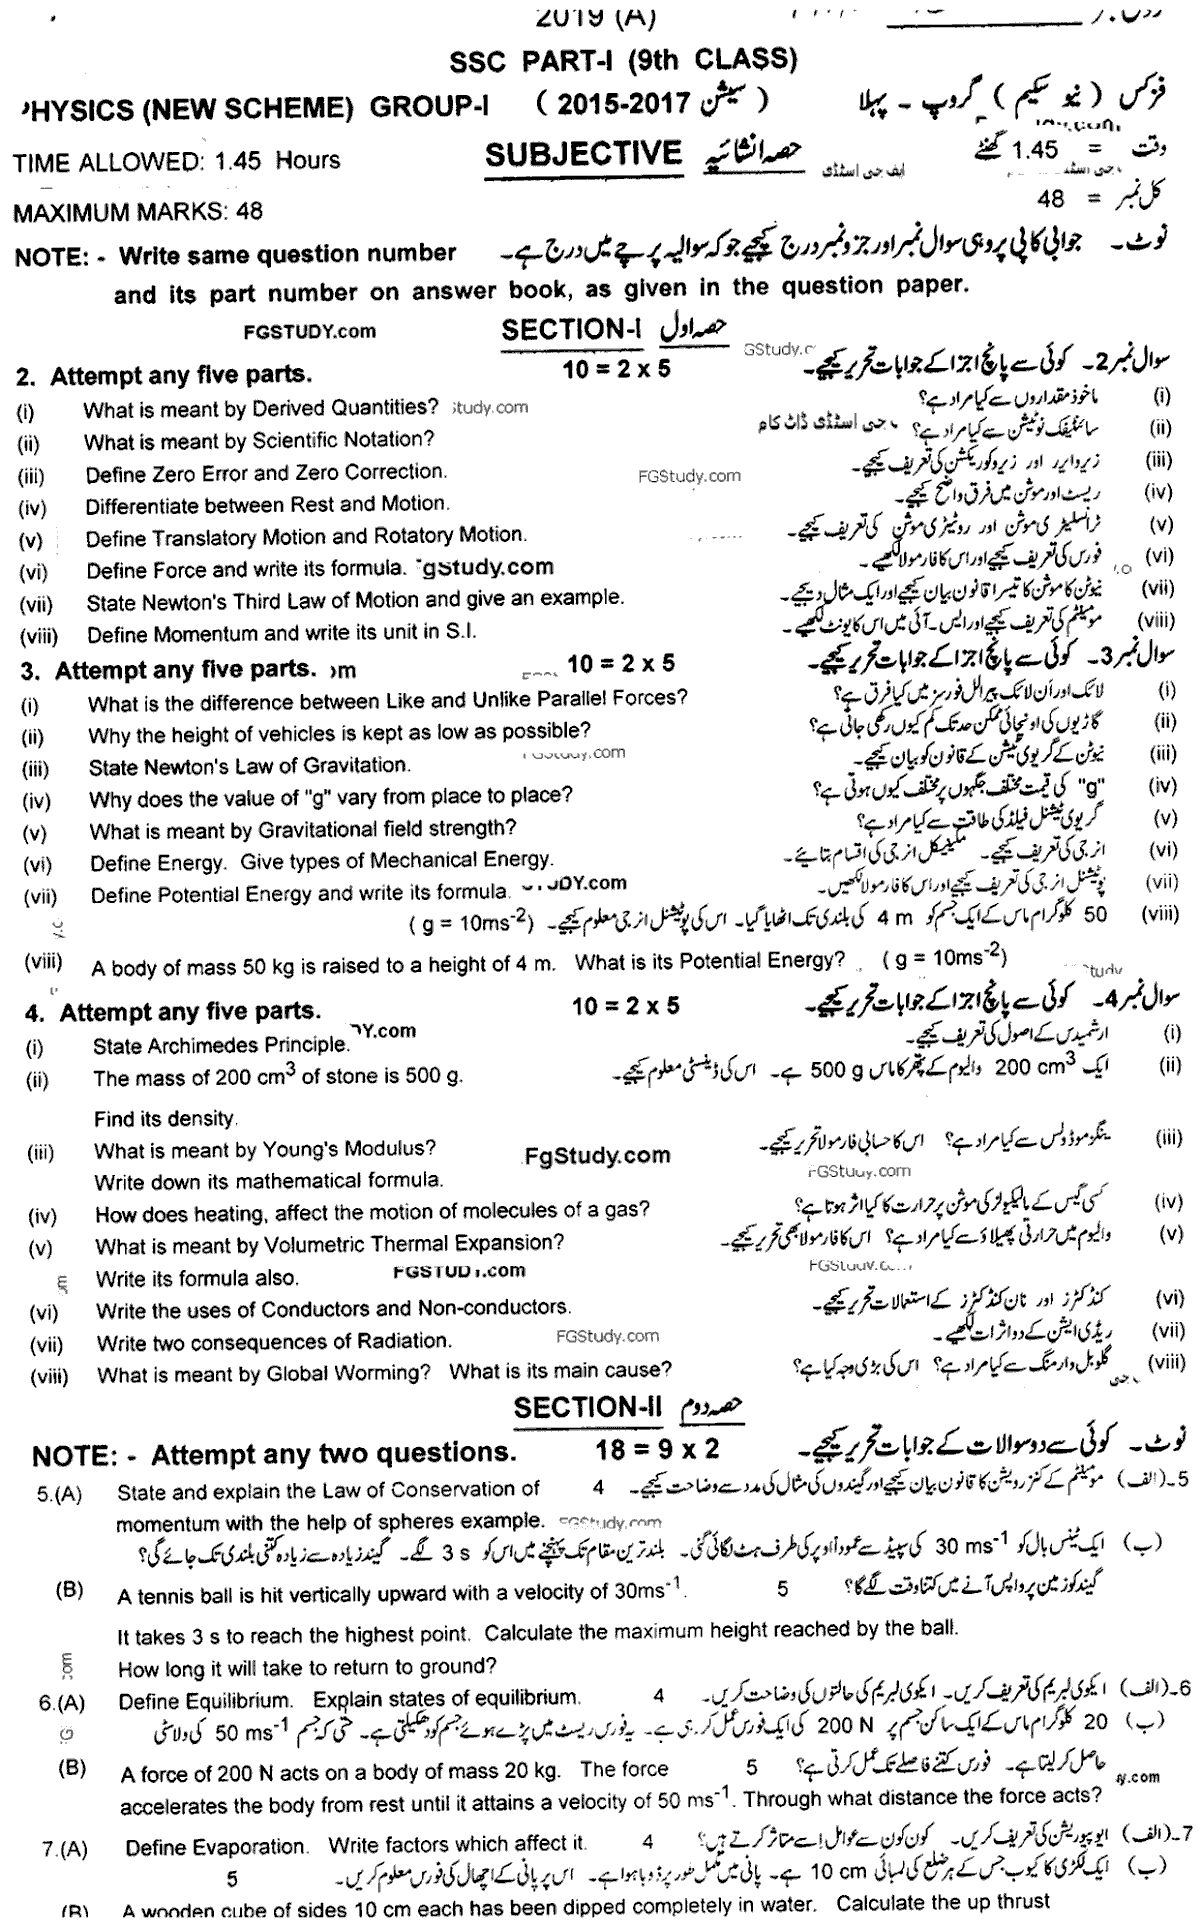 9th Class Physics Past Paper 2019 Group 1 Subjective Multan Board